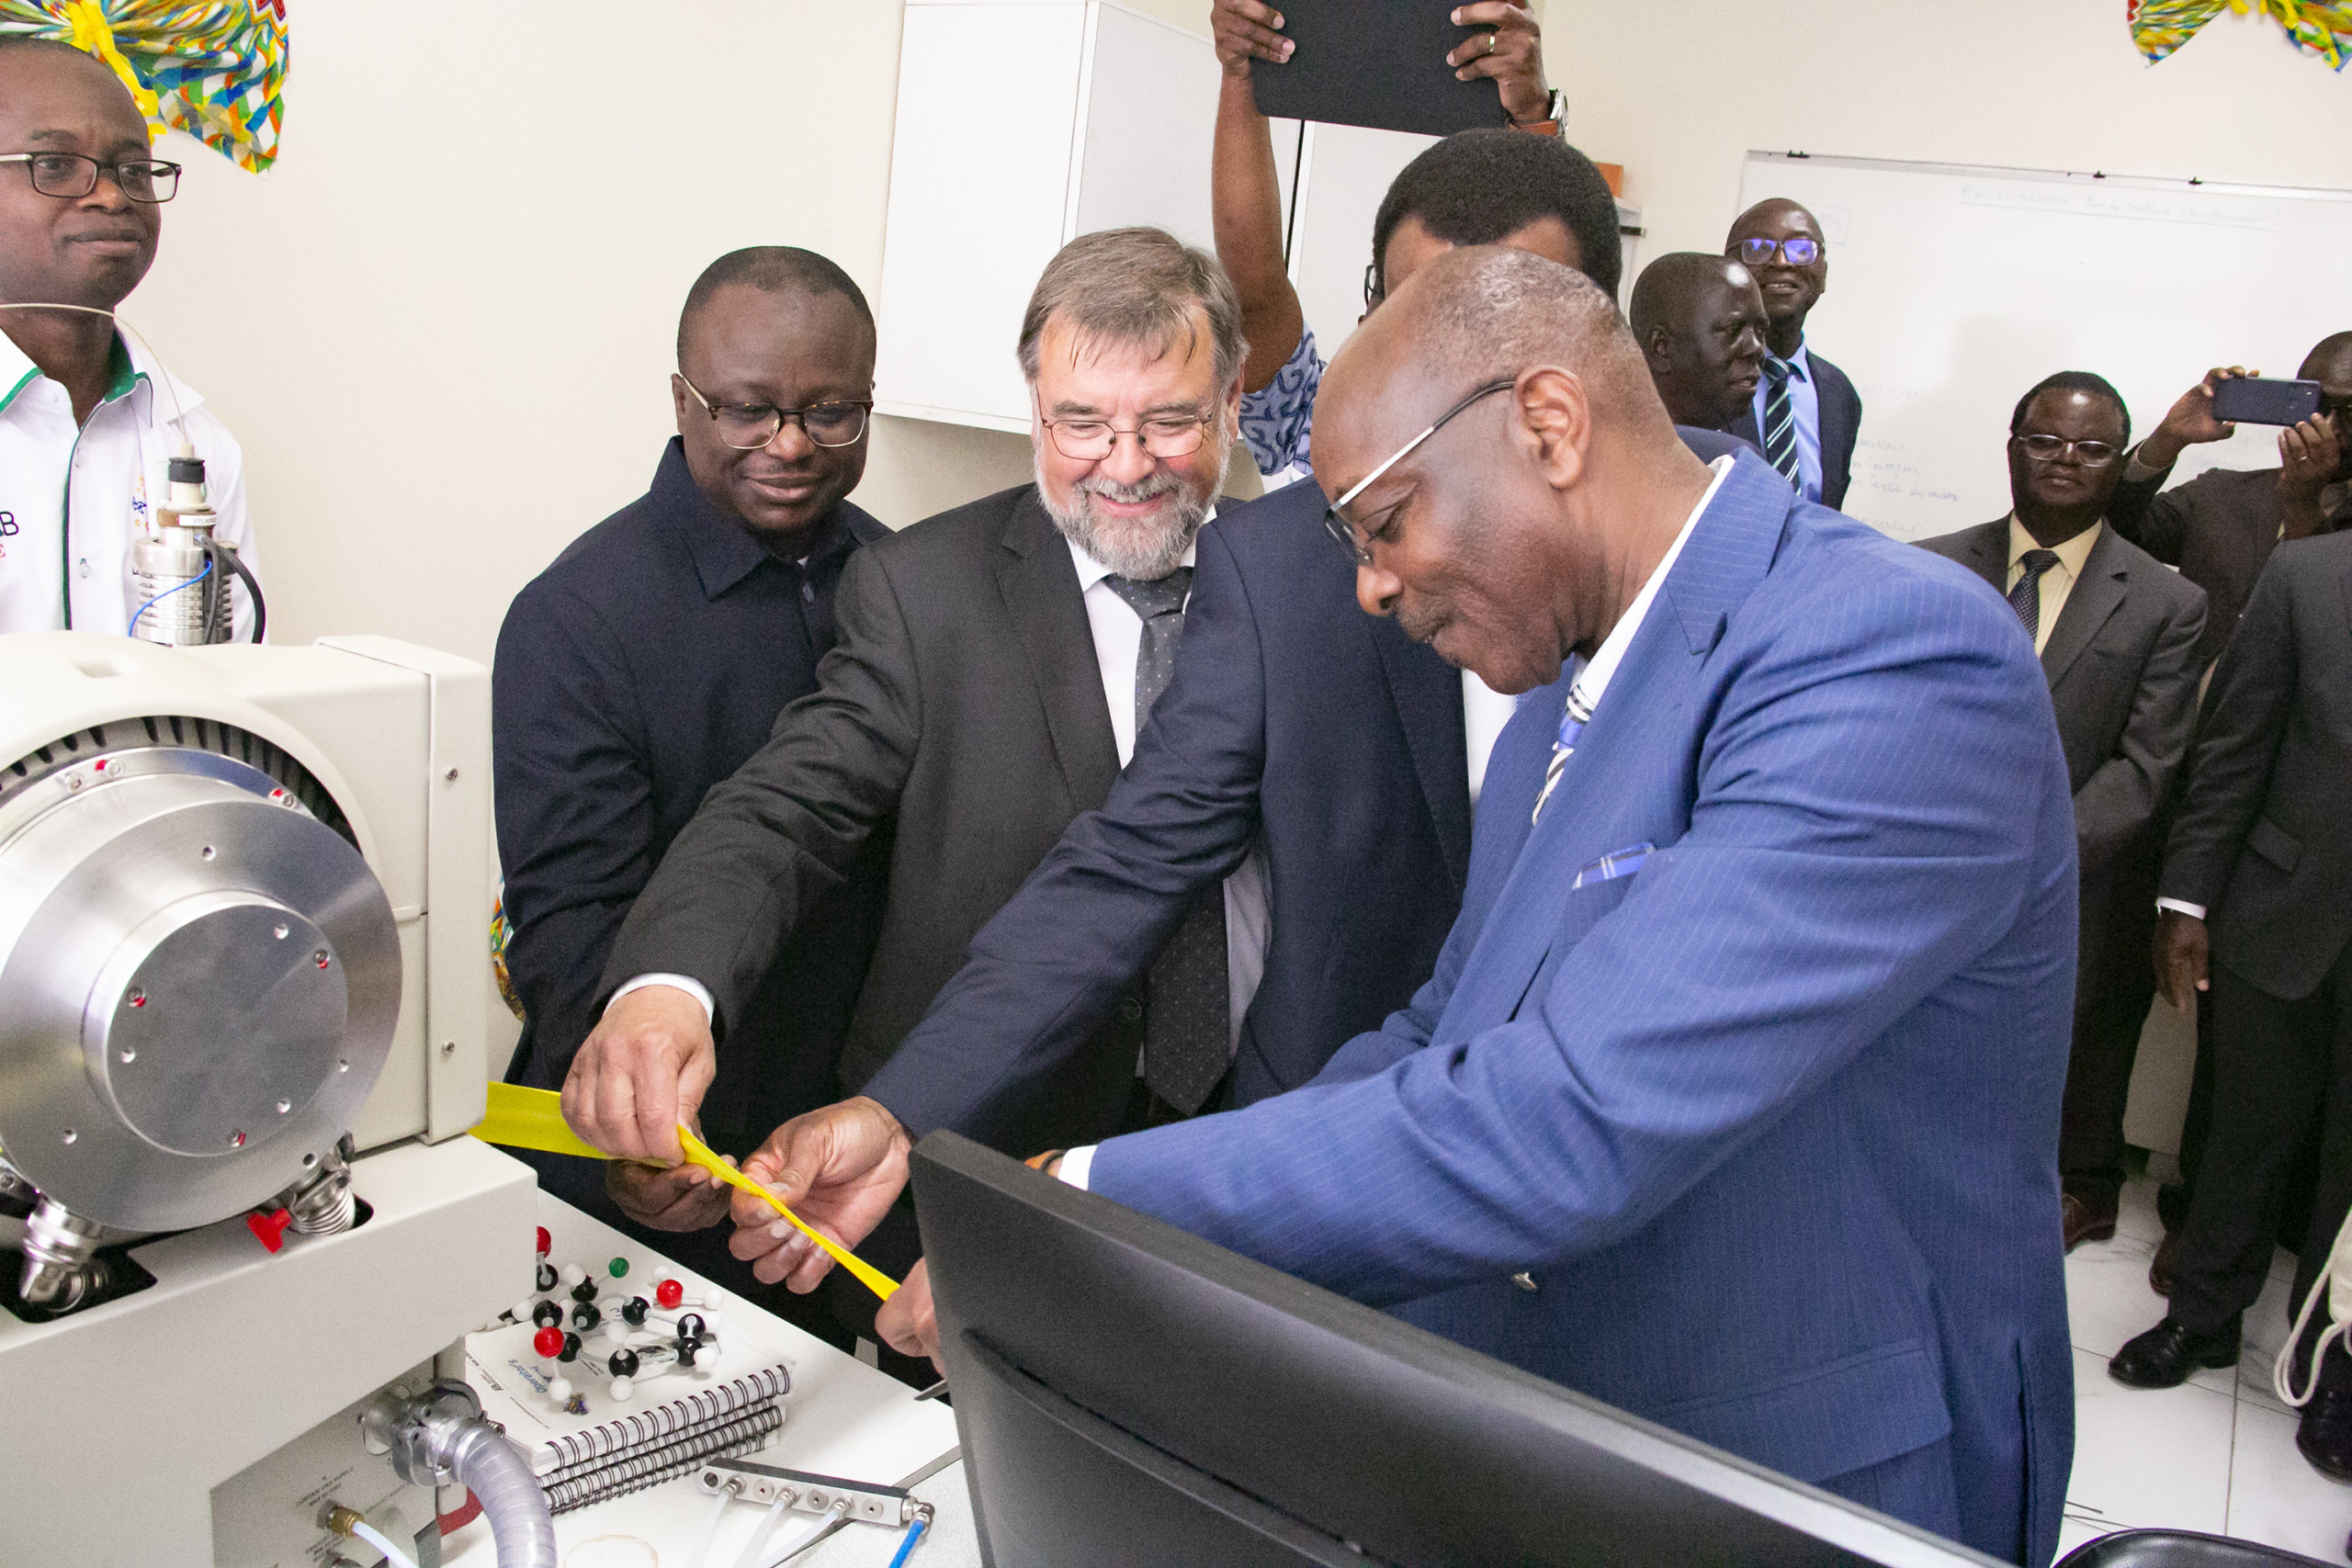 School-business partnership: INP-HB receives state-of-the-art laboratory equipment.